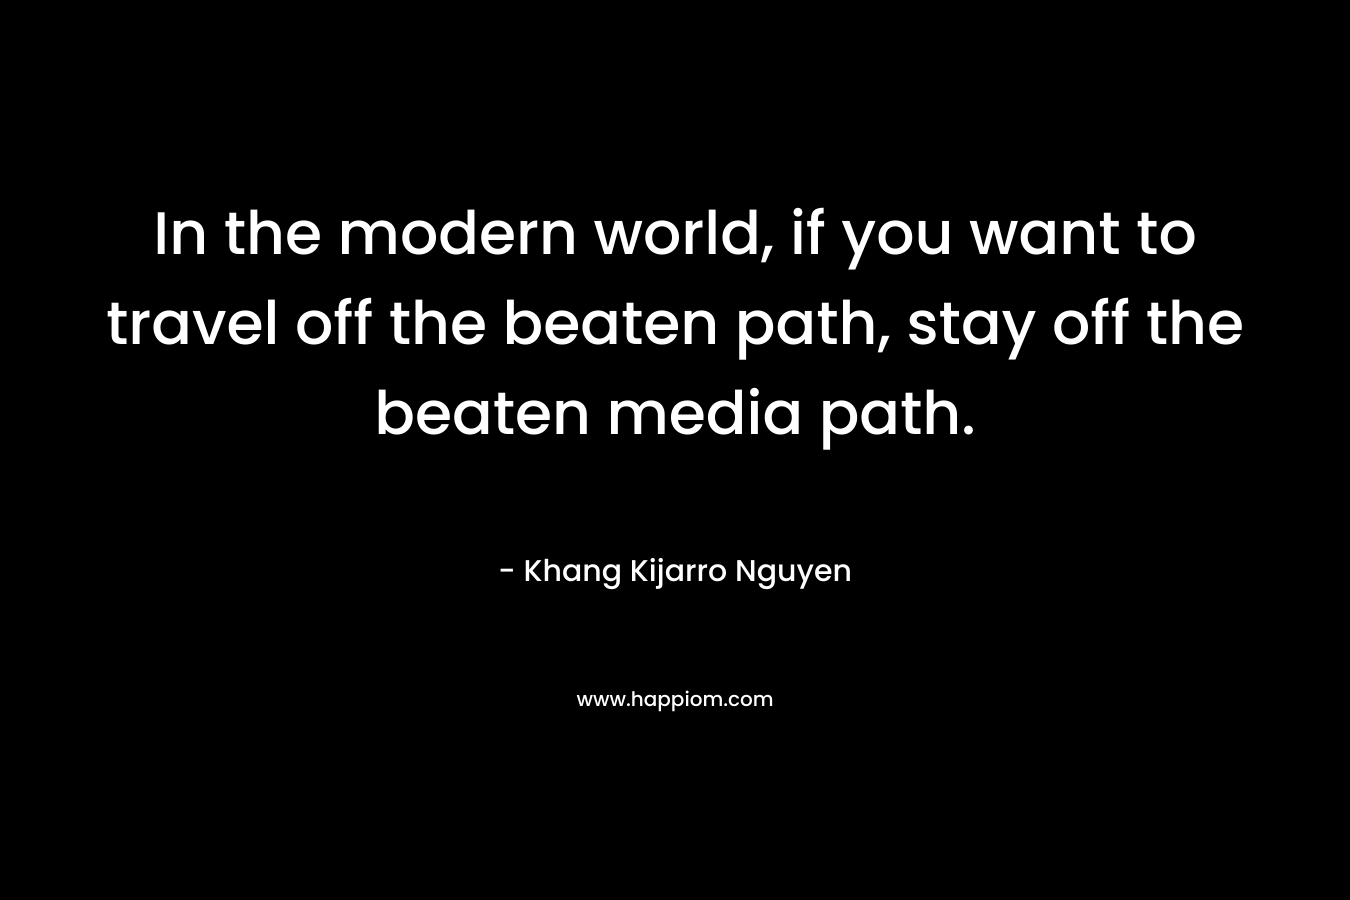 In the modern world, if you want to travel off the beaten path, stay off the beaten media path.